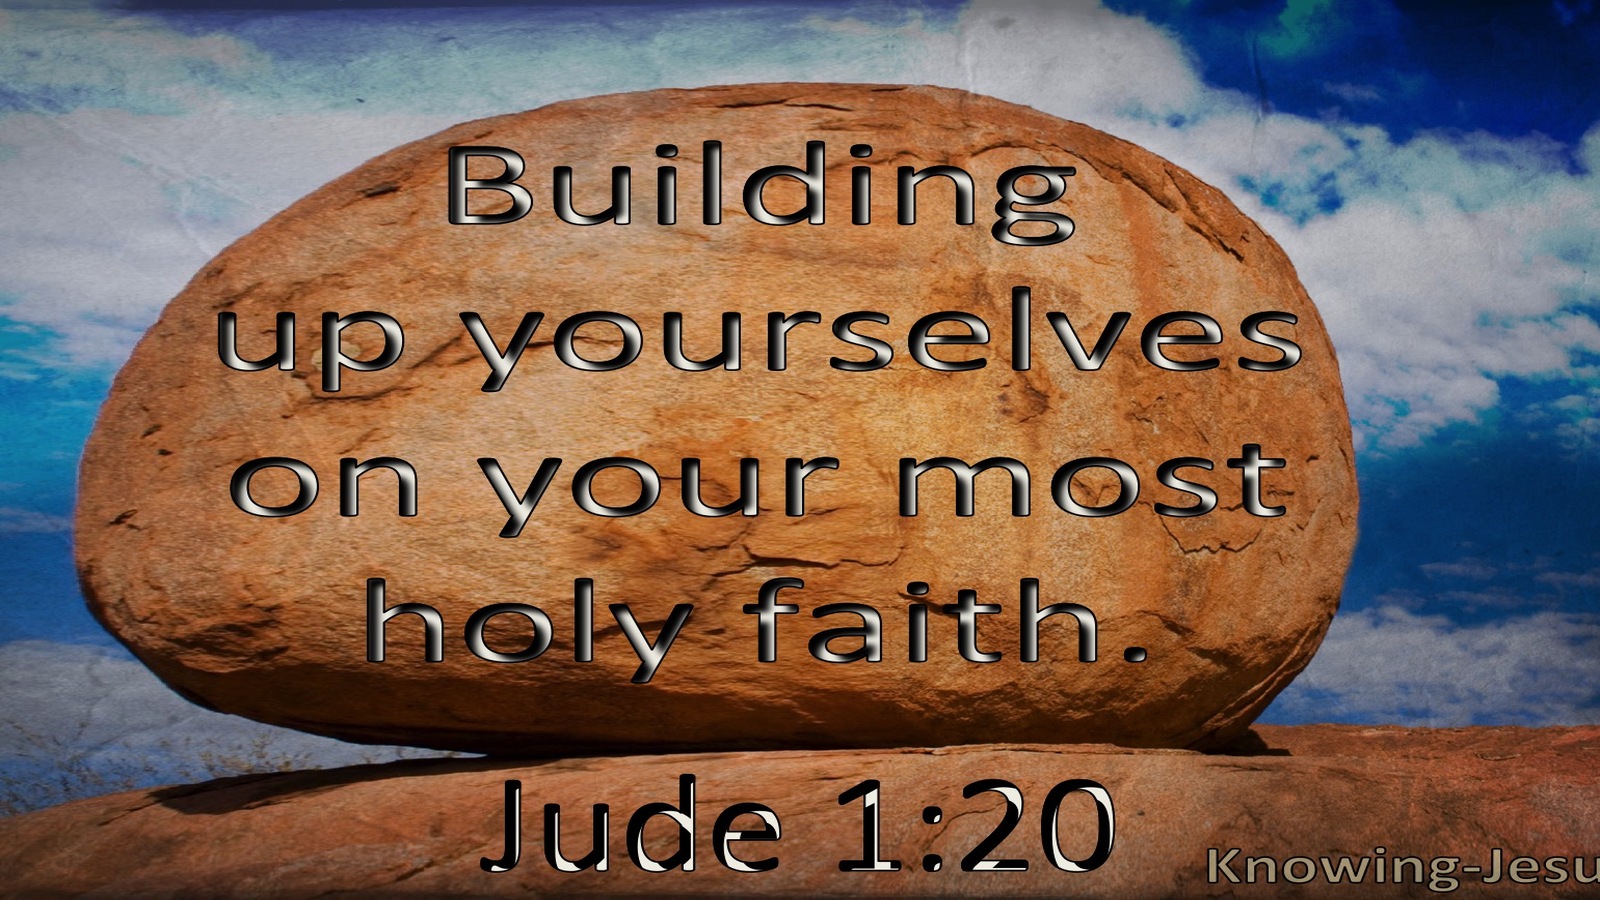 Jude 1:20 Building Up Yourselves On Your Most Holy Faith (utmost)10:21